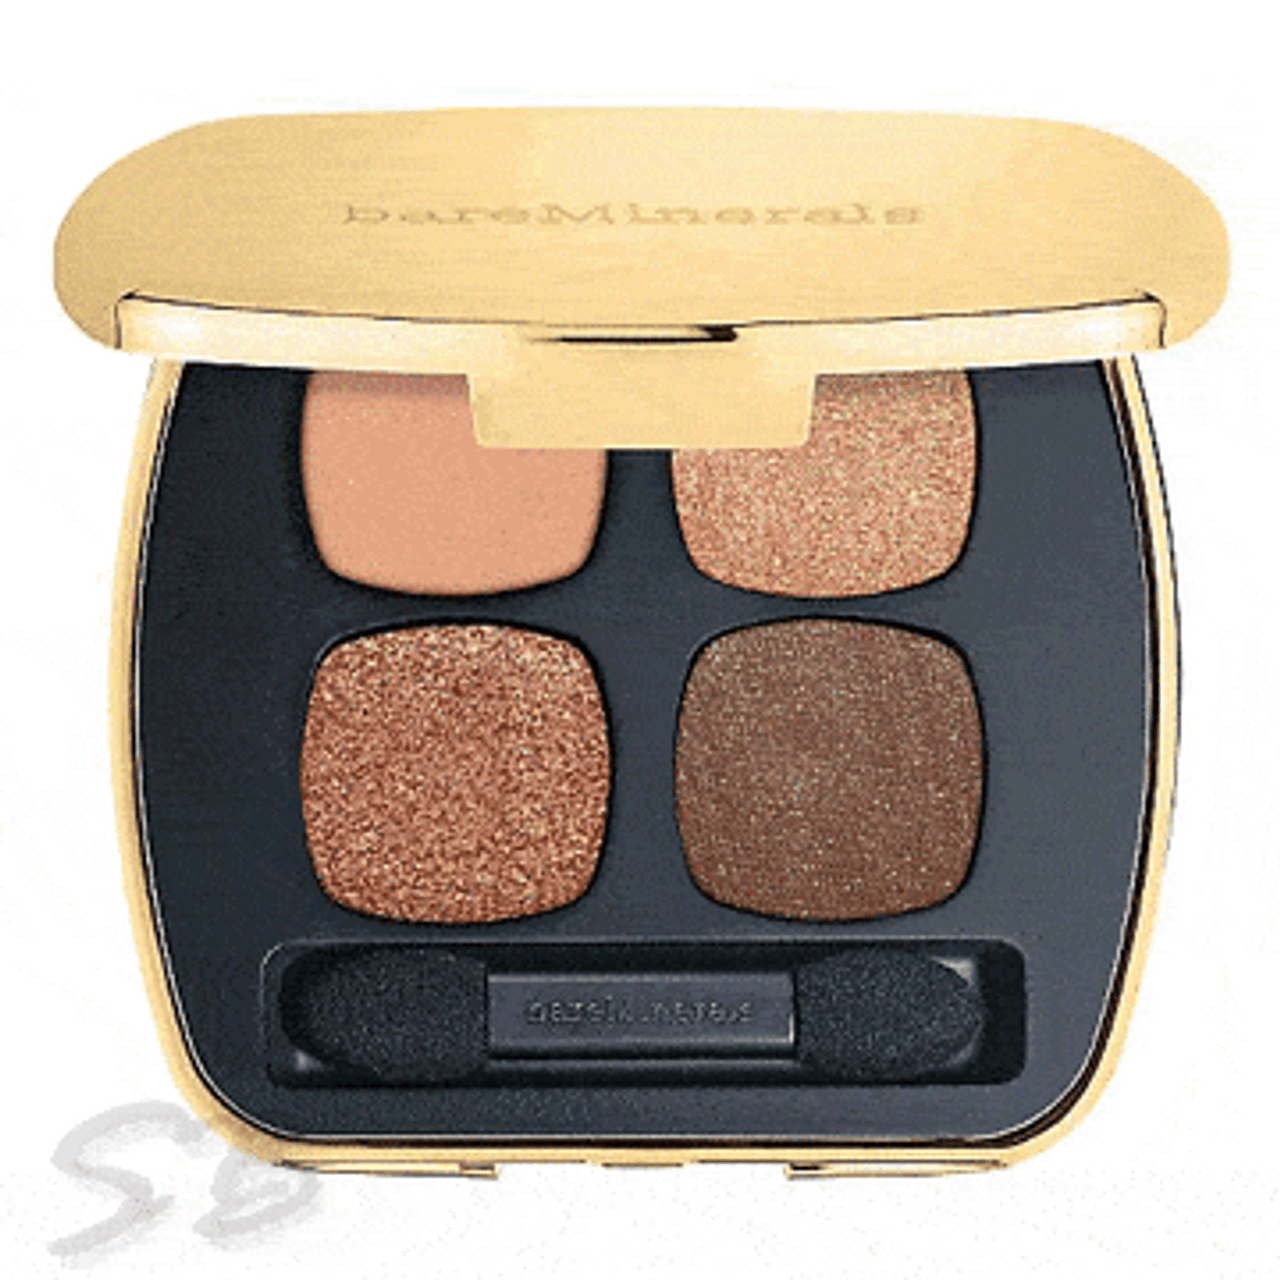 bareMinerals READY Eyeshadow 4.0 The Instant Attraction - 0.17 oz (79258)